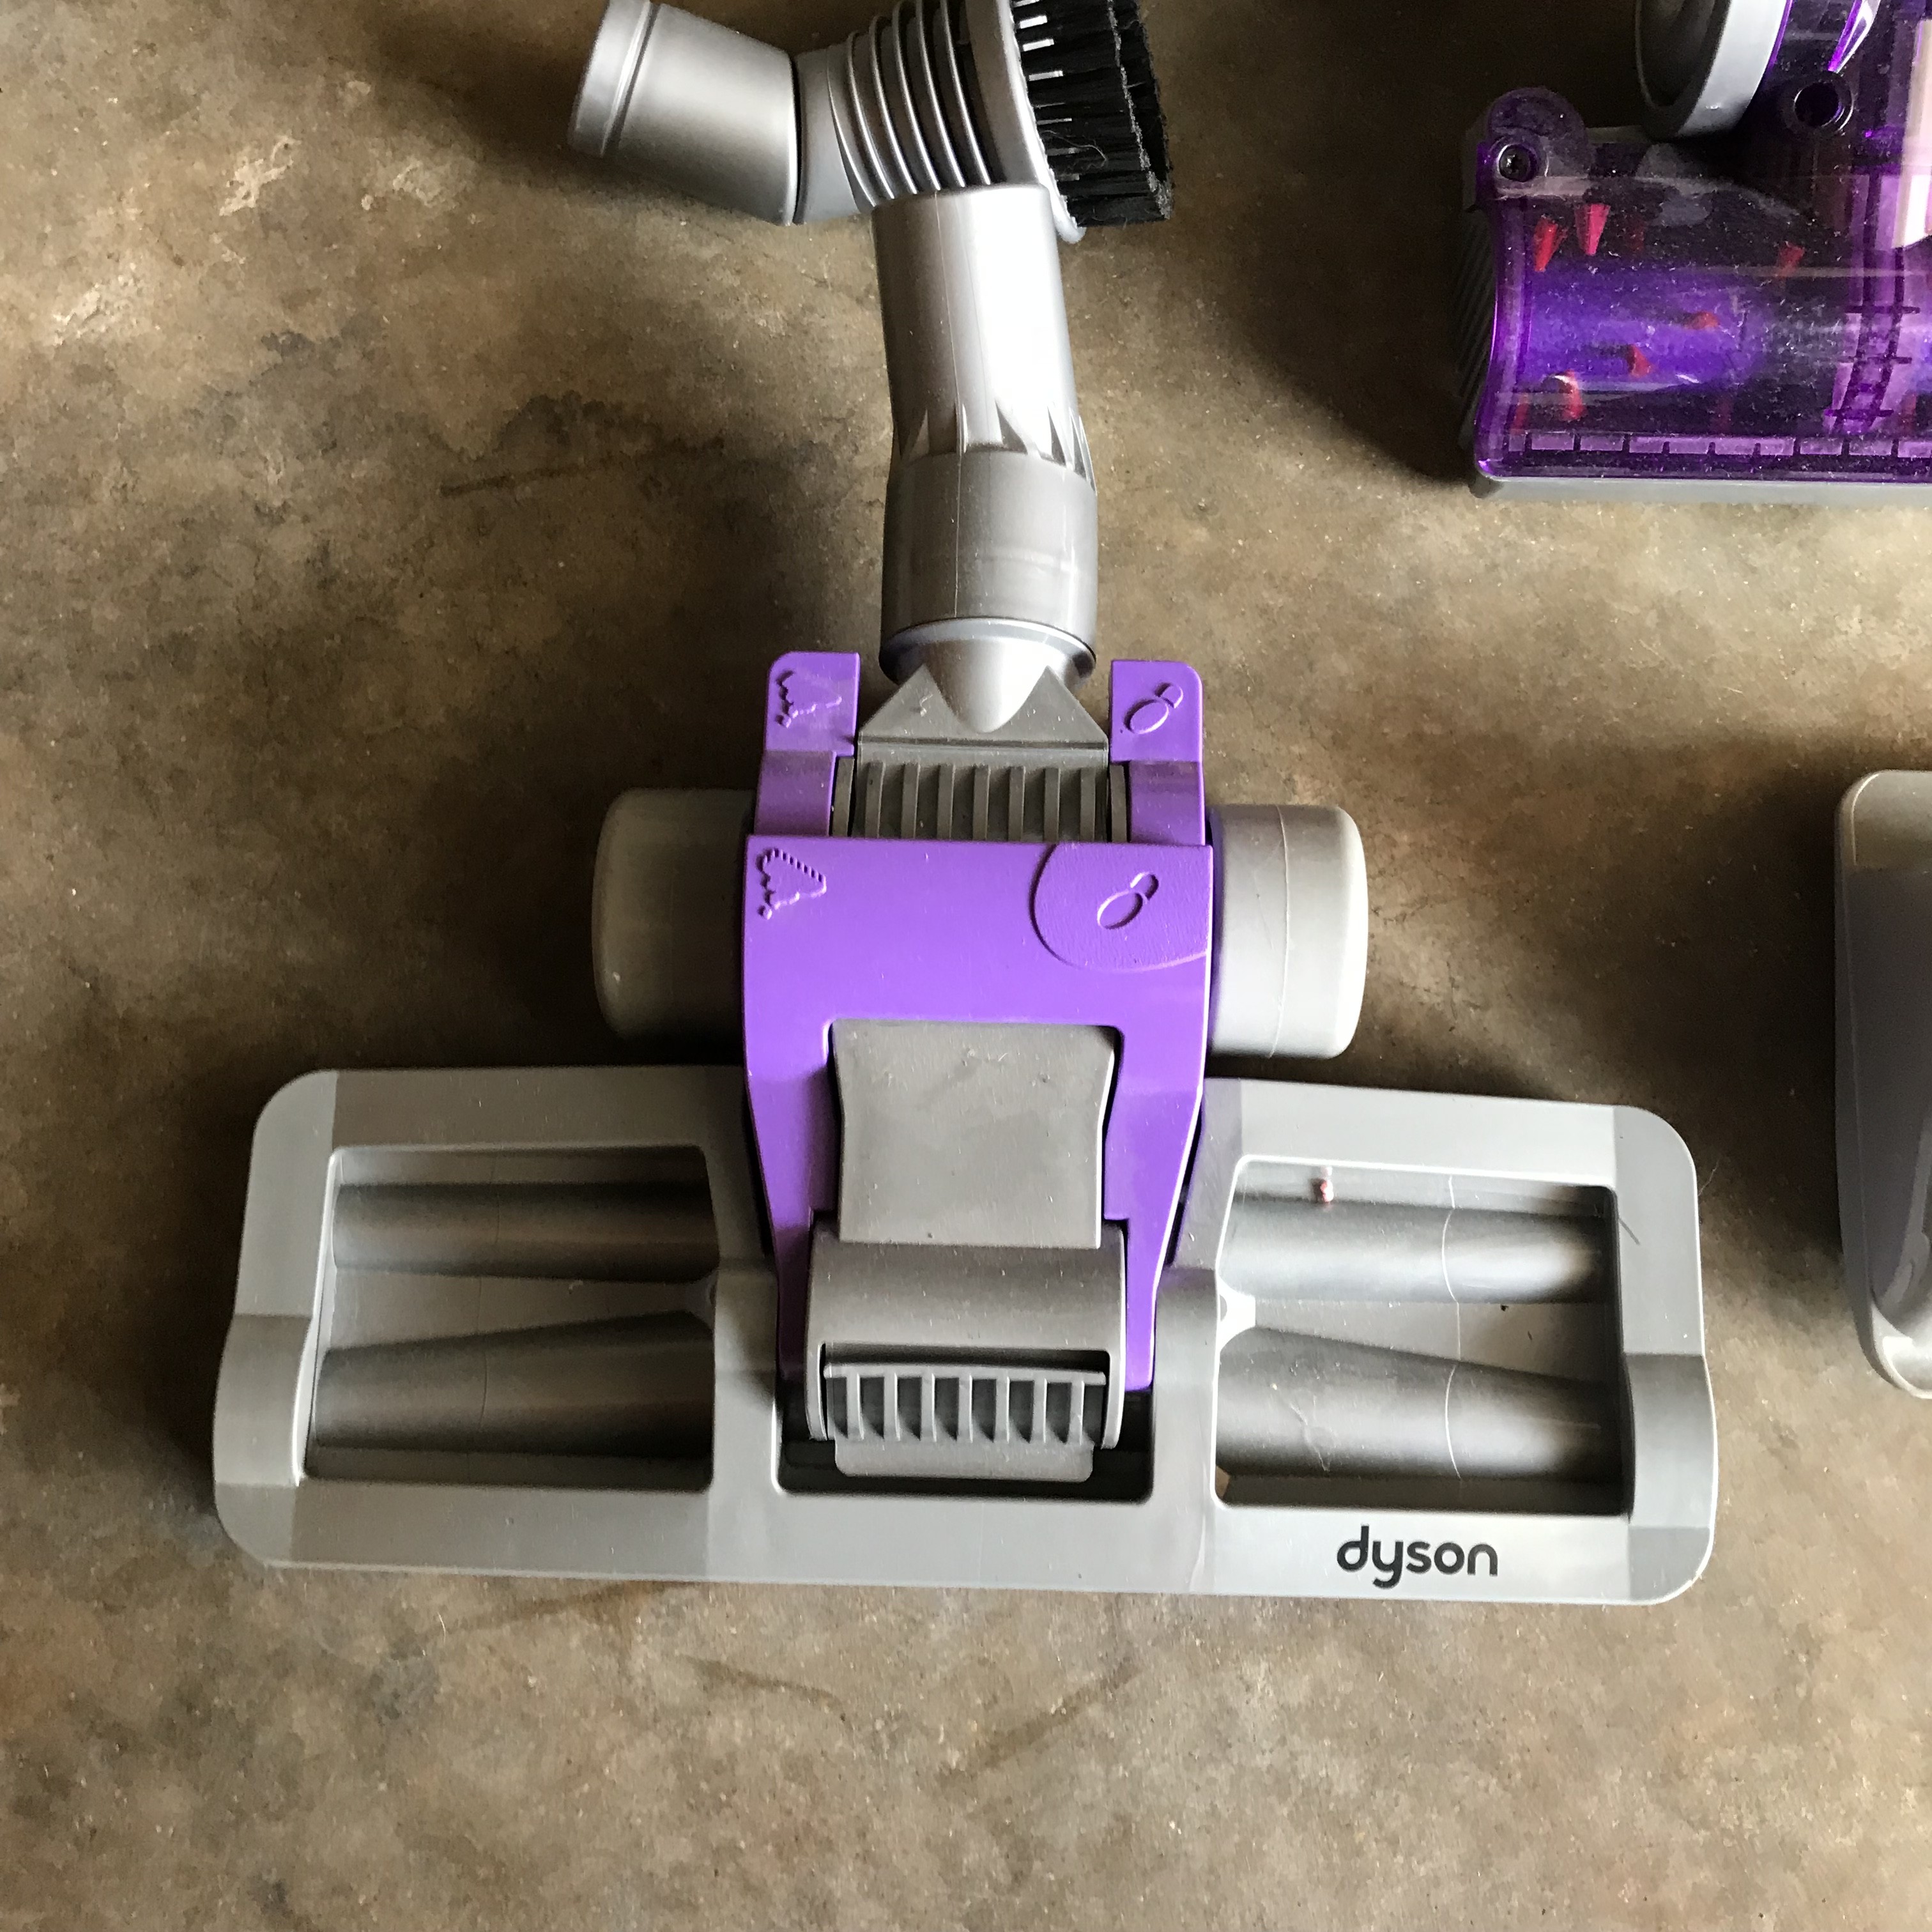 DYSON DC14 Animal Vacuum Cleaner with Many Accessory Attachments ...